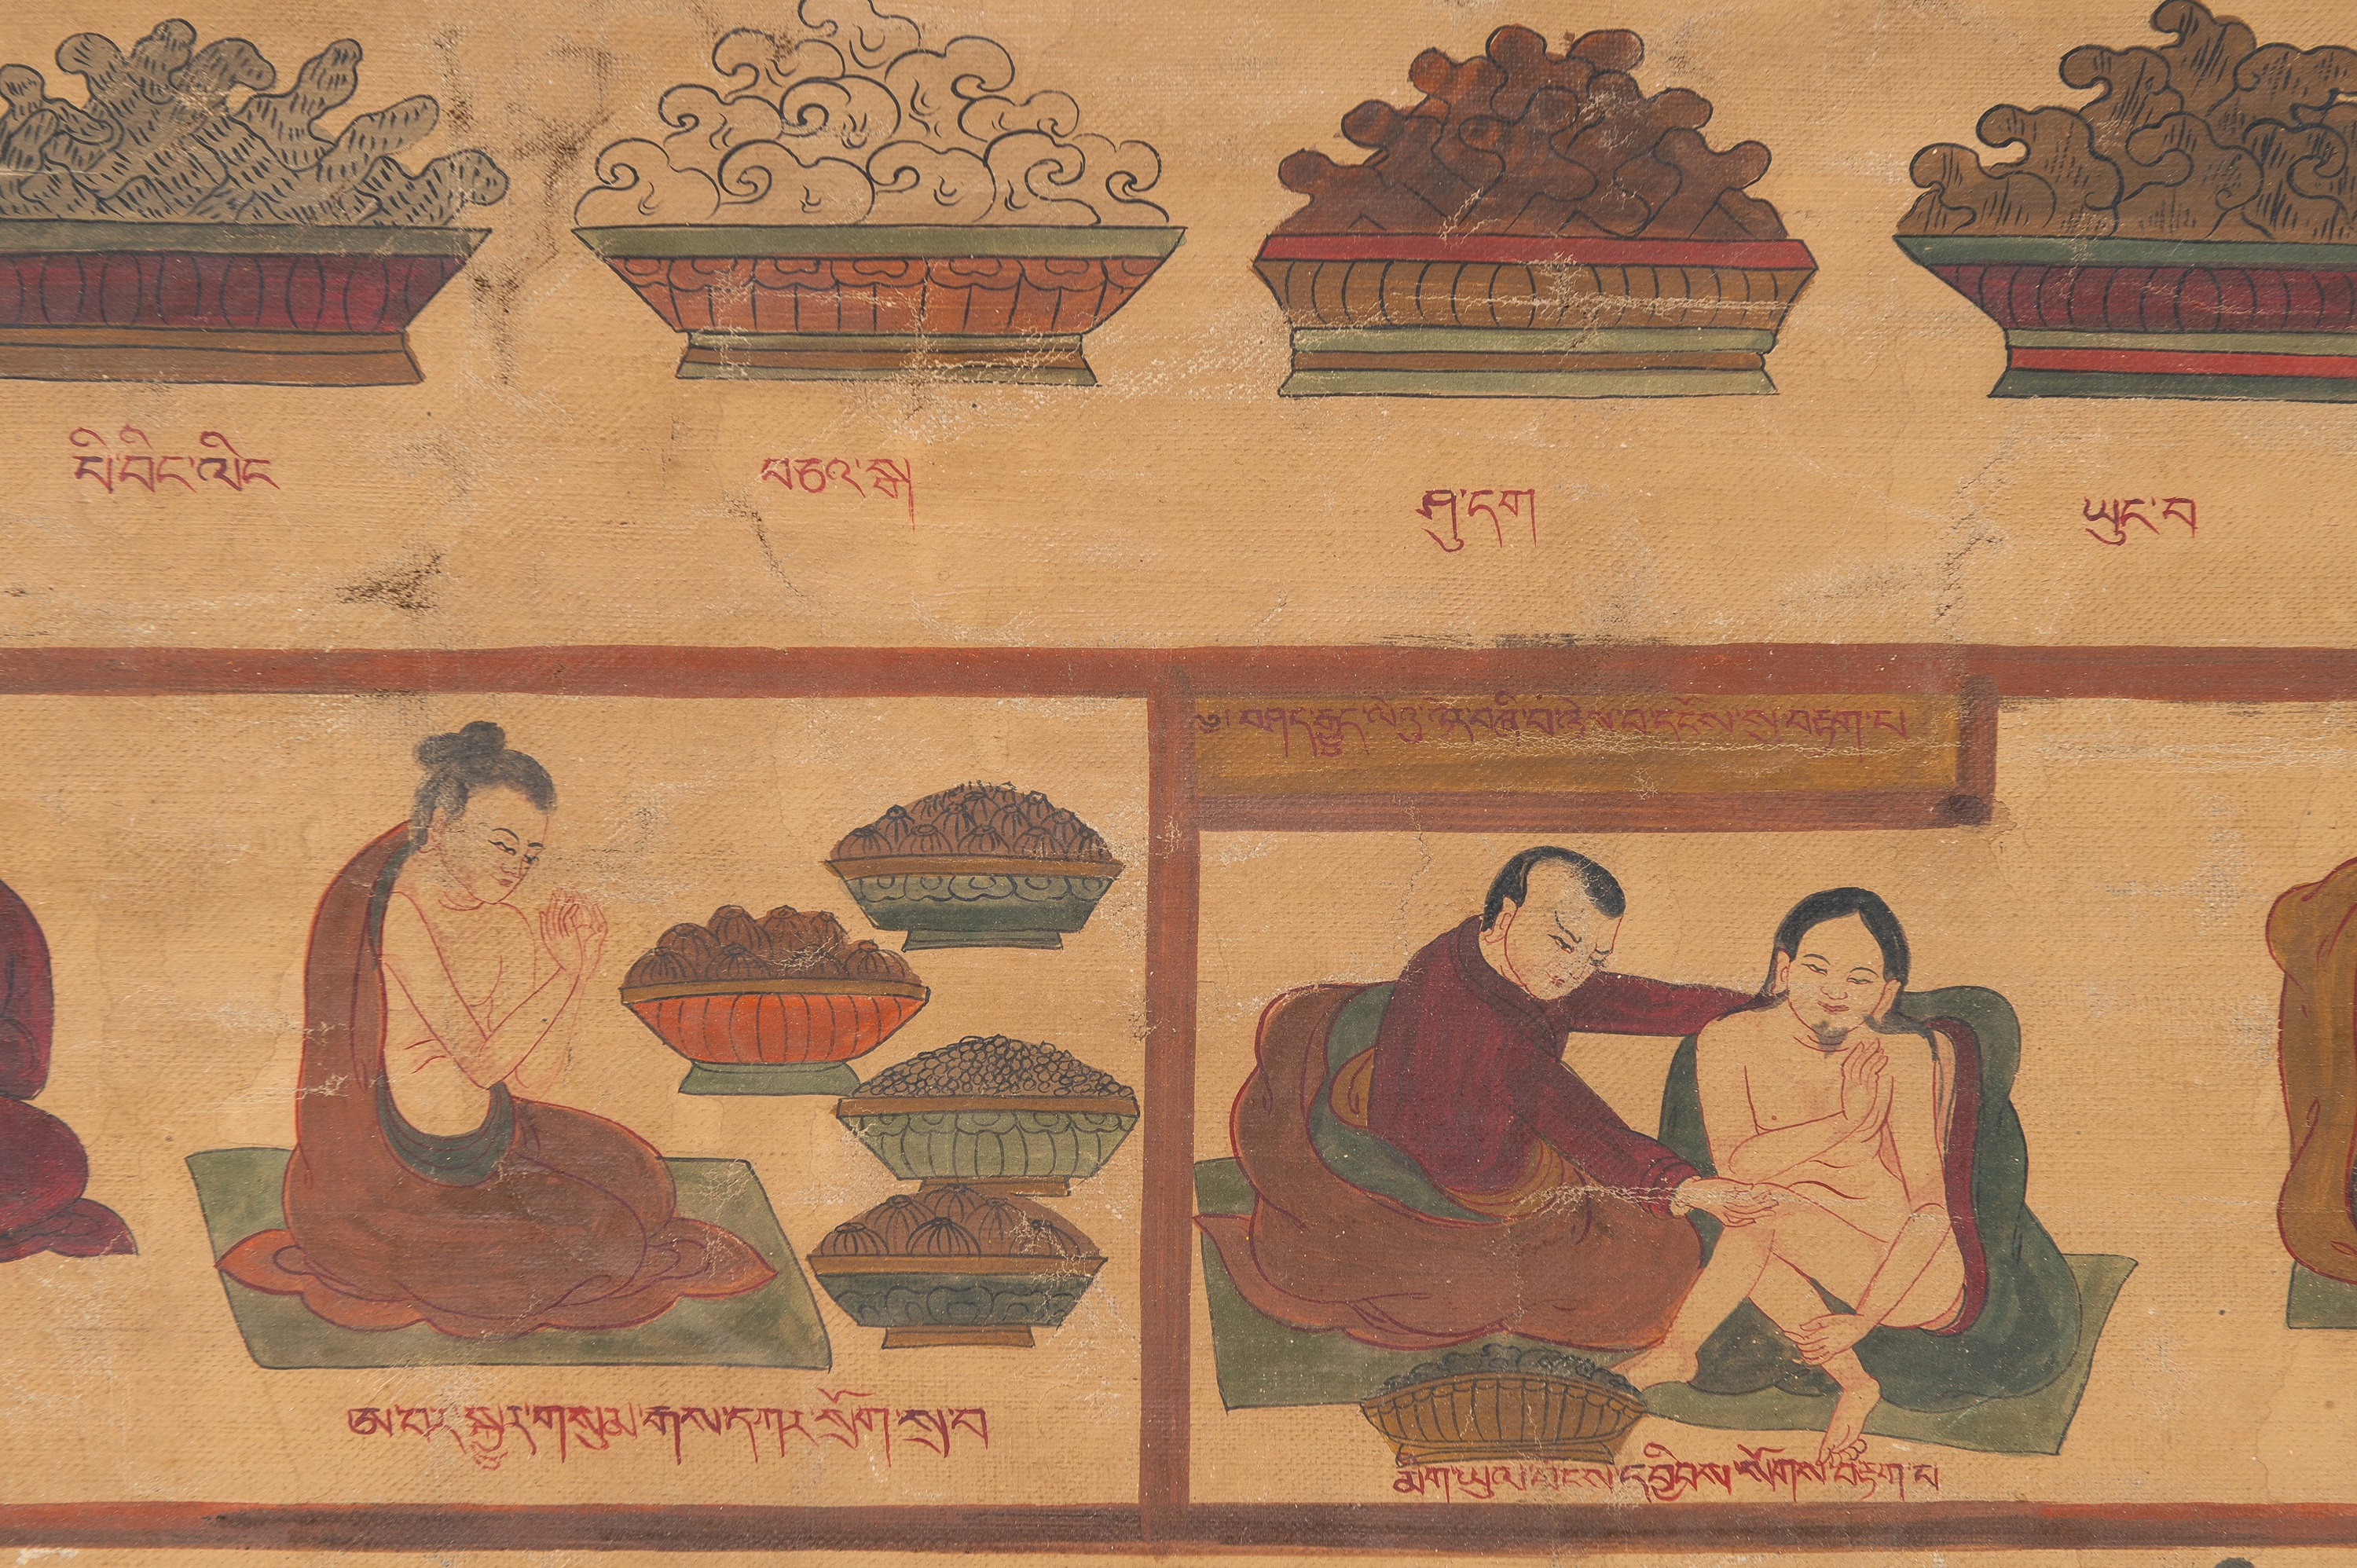 A TIBETAN PAINTING ILLLUSTRATING THE MEDICAL TREATISE THE BLUE BERYL, CHAPTERS 23-28 - Image 8 of 12